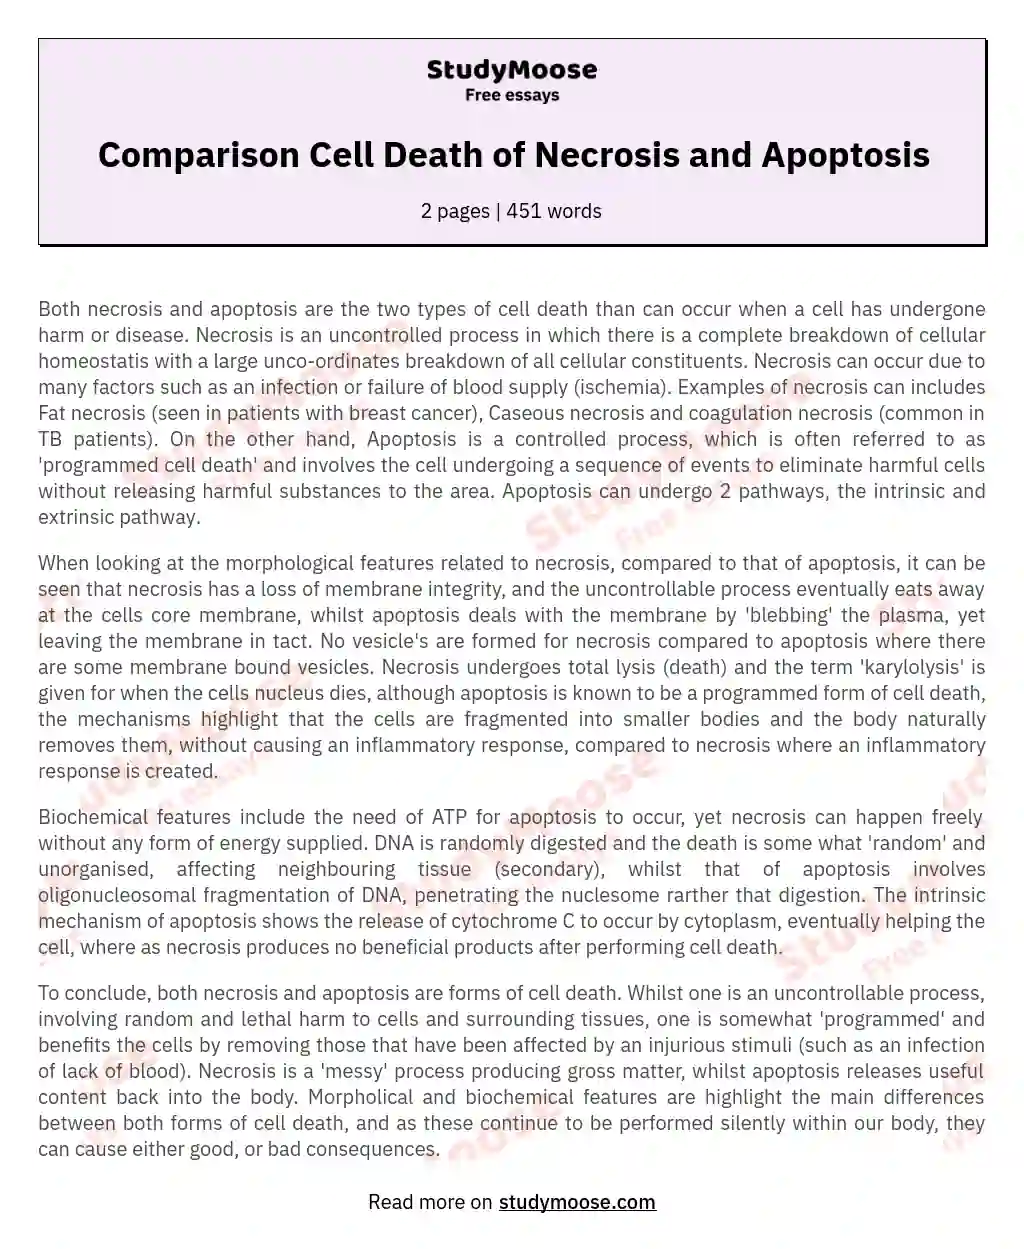 Comparison Cell Death of Necrosis and Apoptosis essay